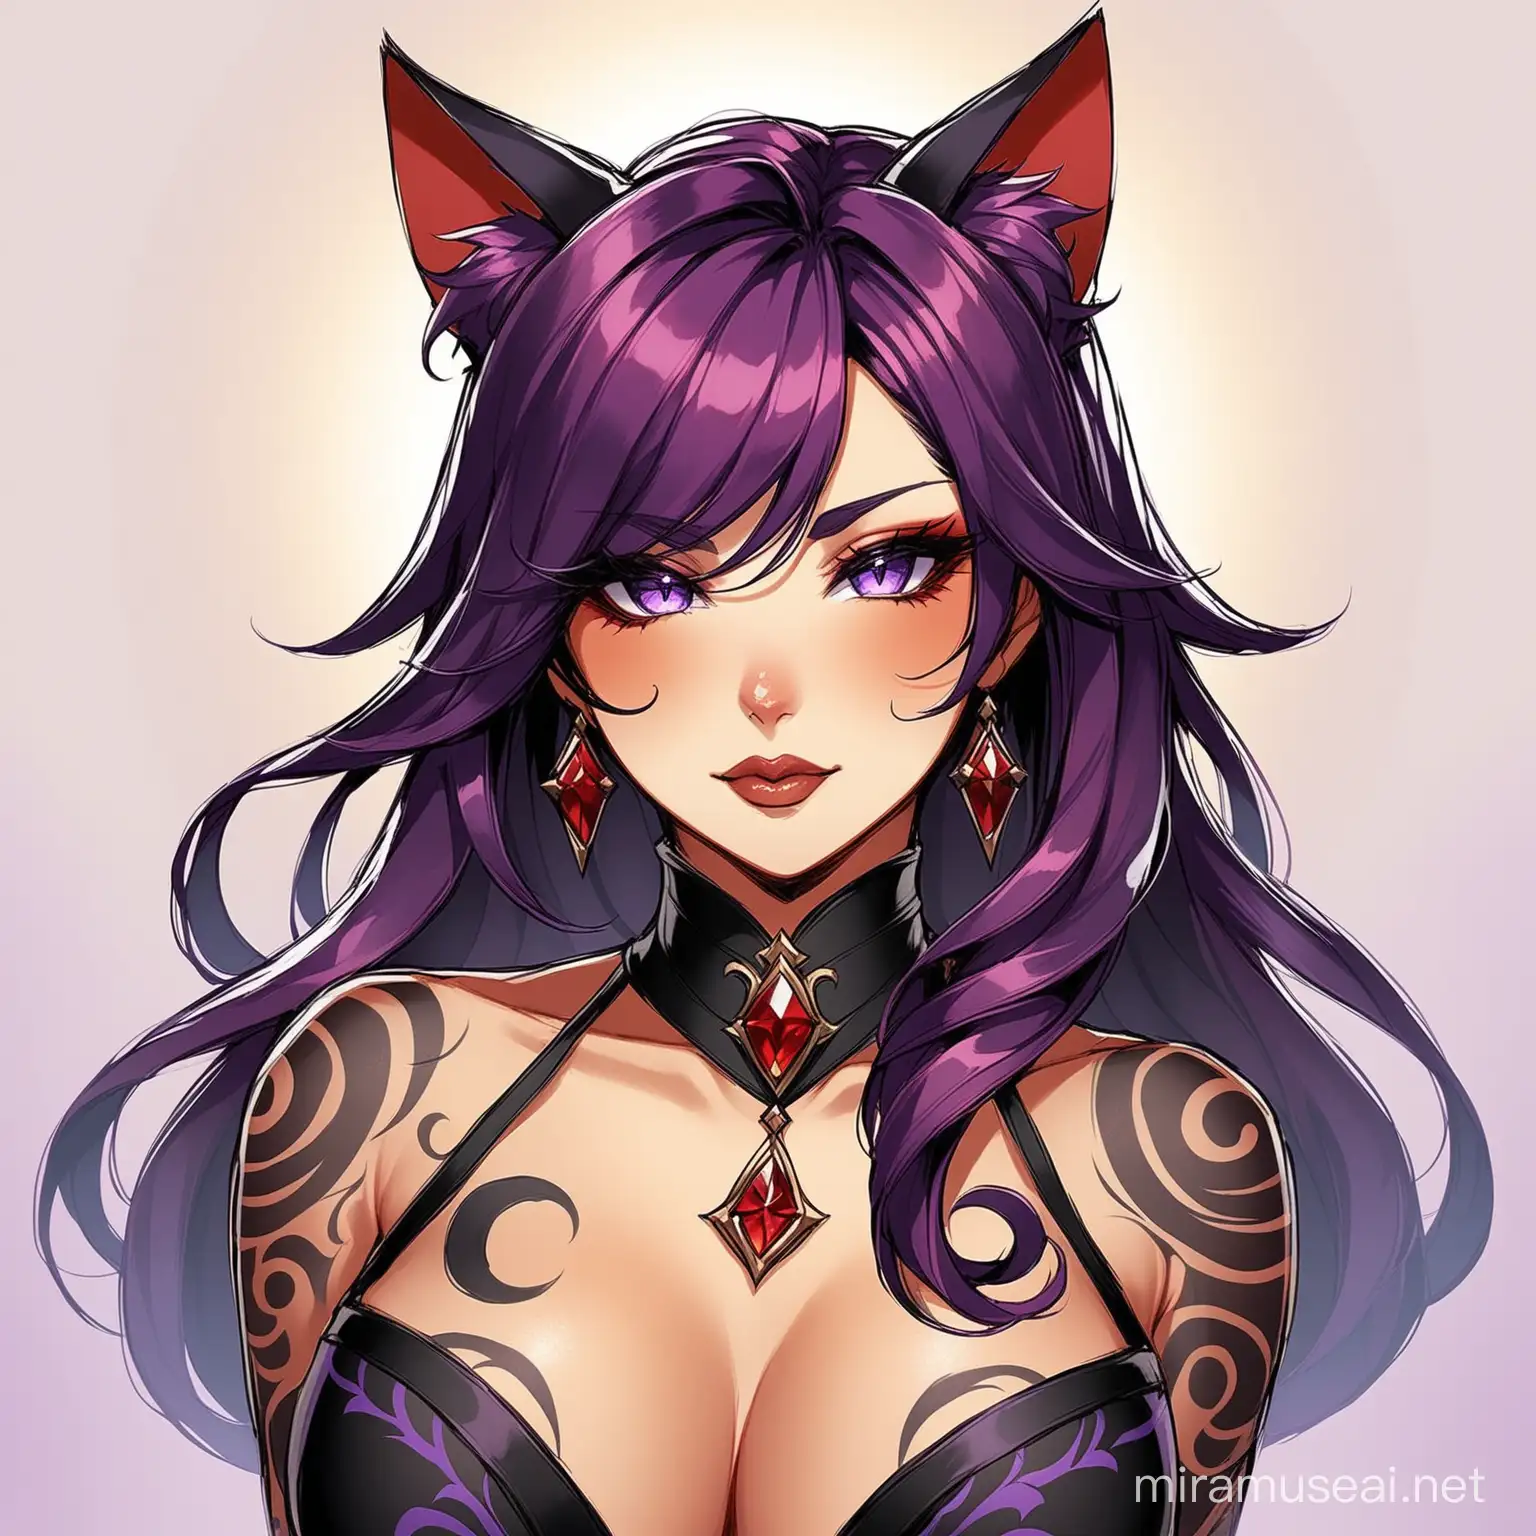 Mature Character with Red Cat Ears and Swirling Tattoos Genshin Impact Style Art